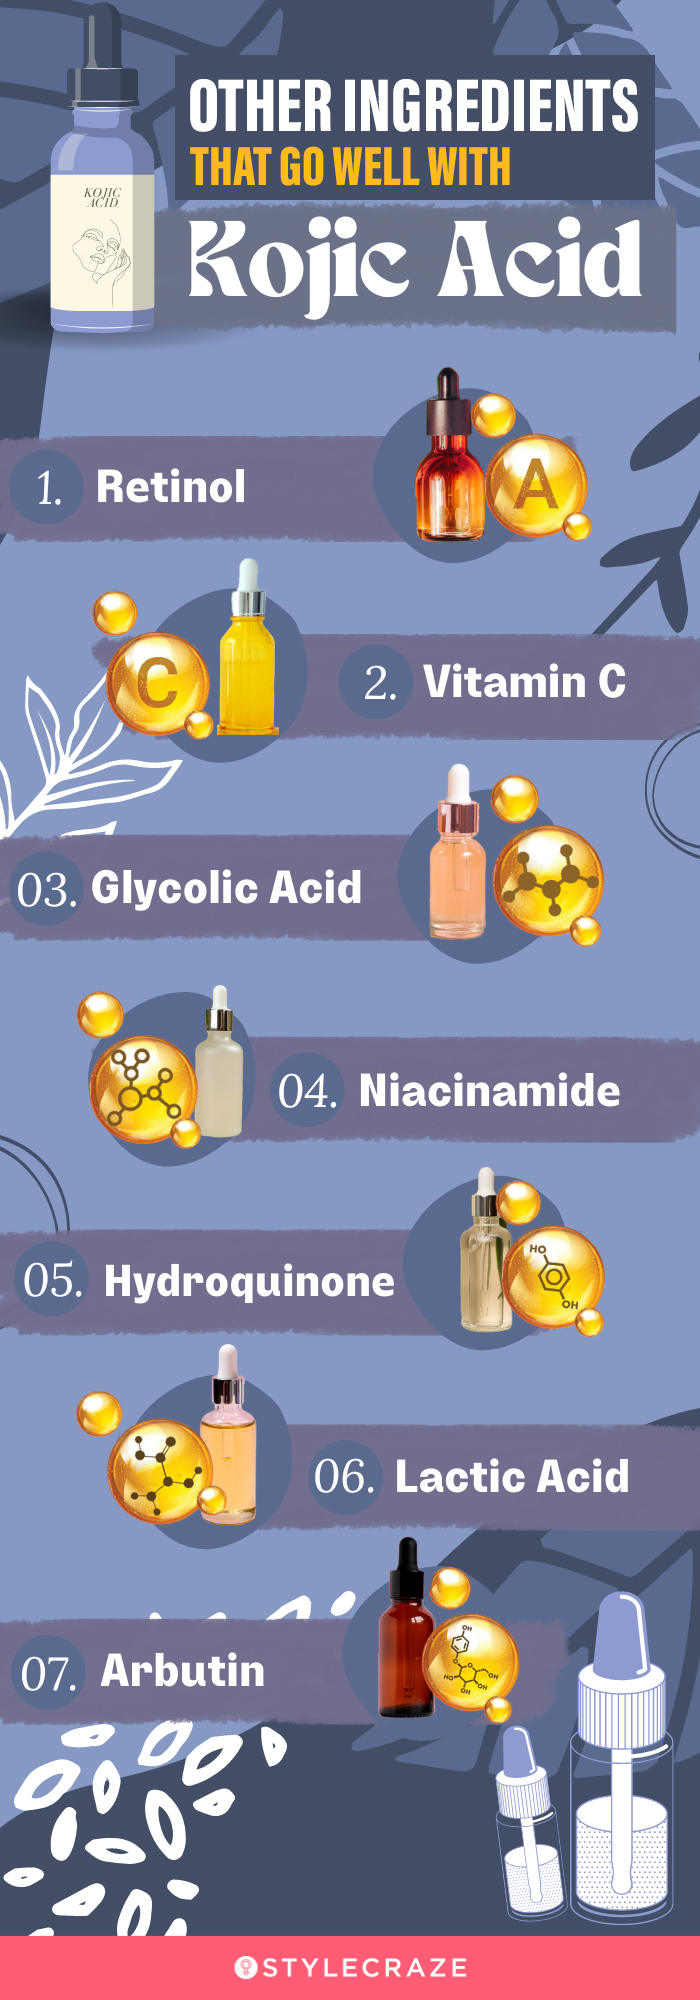 Kojic Acid For Skin: Uses, Benefits, & Things To Keep In Mind